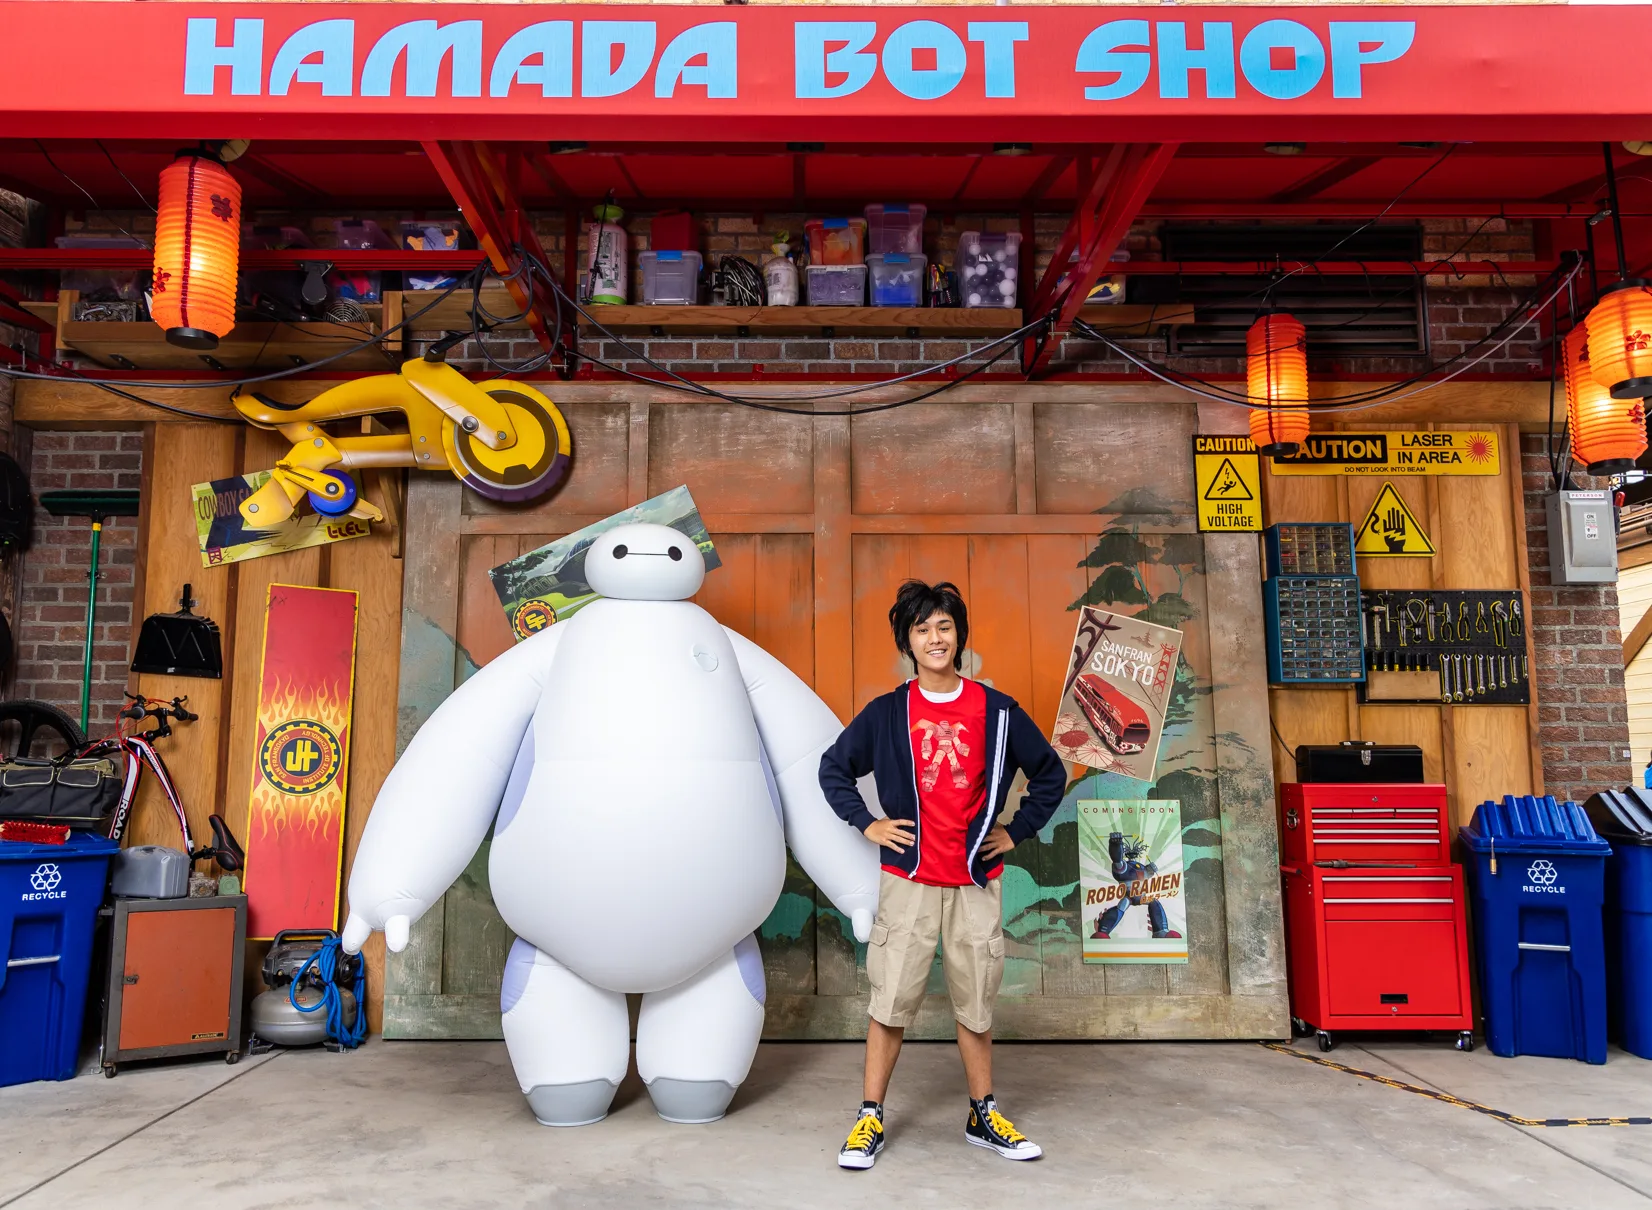 When guests step into San Fransokyo Square at Disney California Adventure Park in Anaheim, Calif., they may have the opportunity to interact with boy genius Hiro Hamada and his huggable healthcare companion robot, Baymax, outside the Hamada Bot Shop.